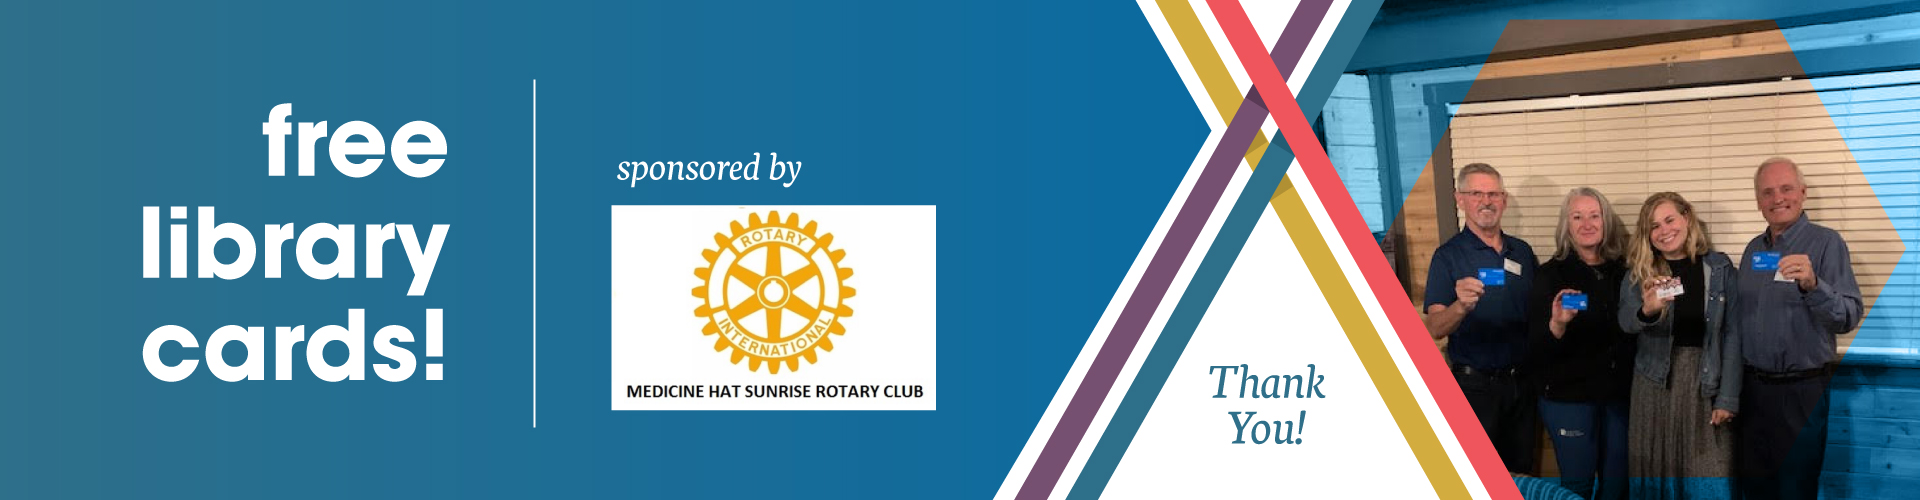 FREE Library Cards! Sponsored by the Medicine Hat Sunrise Rotary Club